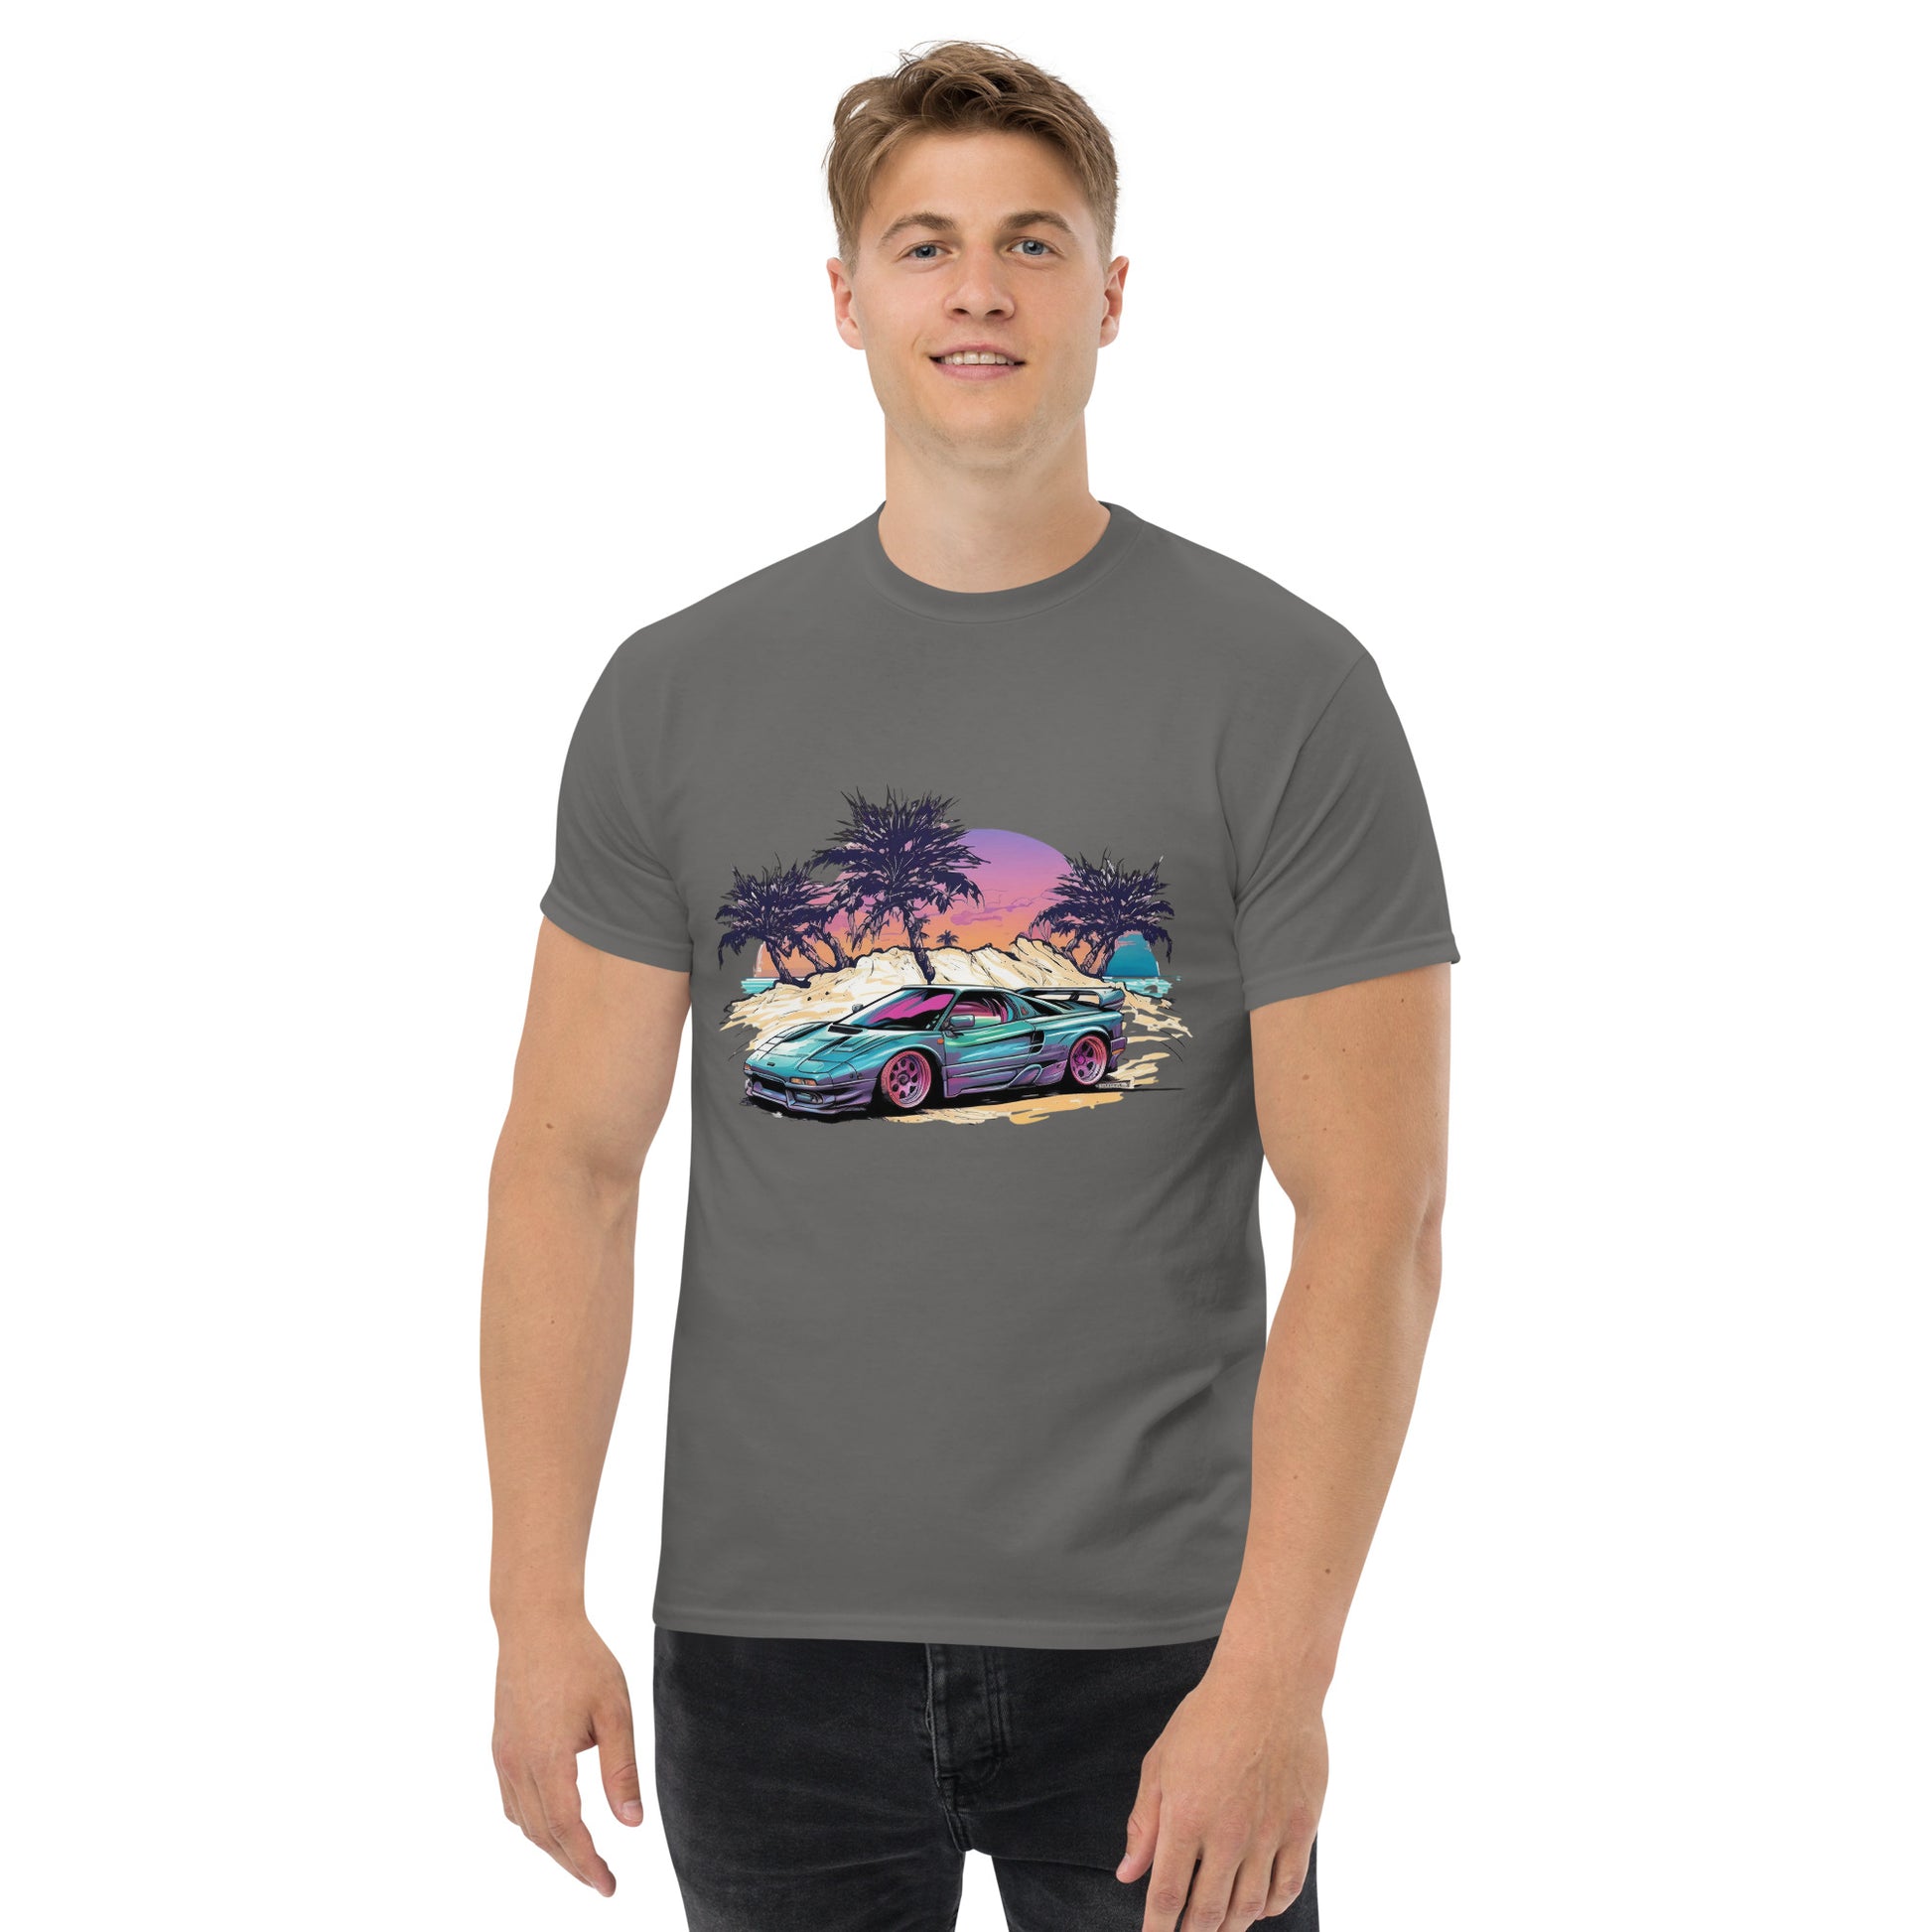 man with grey t-shirt with picture of vintage car in front of palm trees 